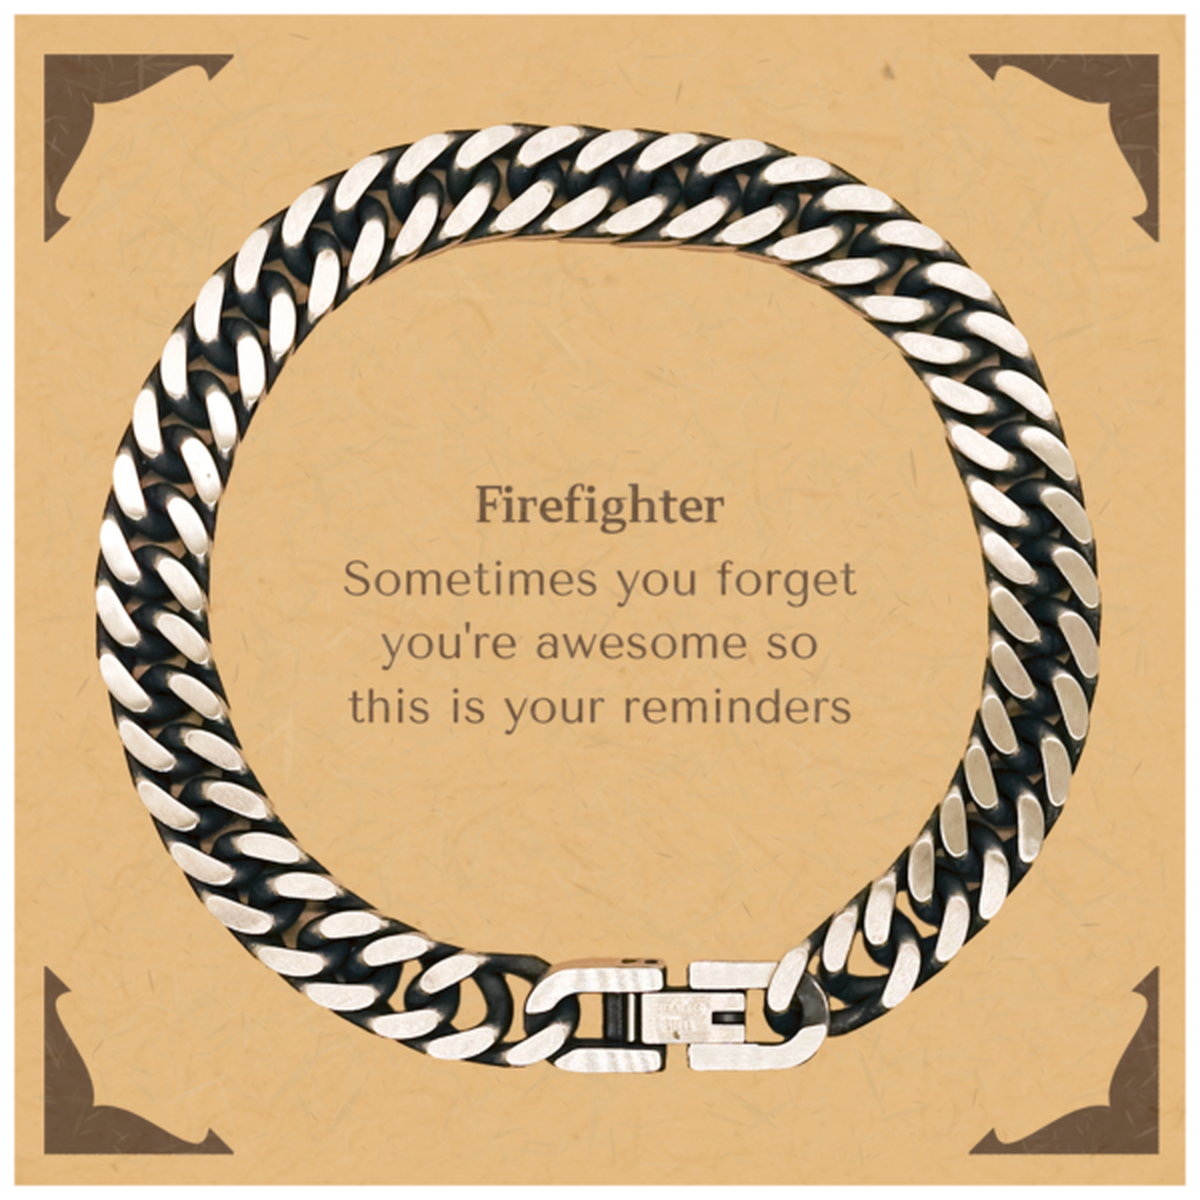 Sentimental Firefighter Cuban Link Chain Bracelet, Firefighter Sometimes you forget you're awesome so this is your reminders, Graduation Christmas Birthday Gifts for Firefighter, Men, Women, Coworkers